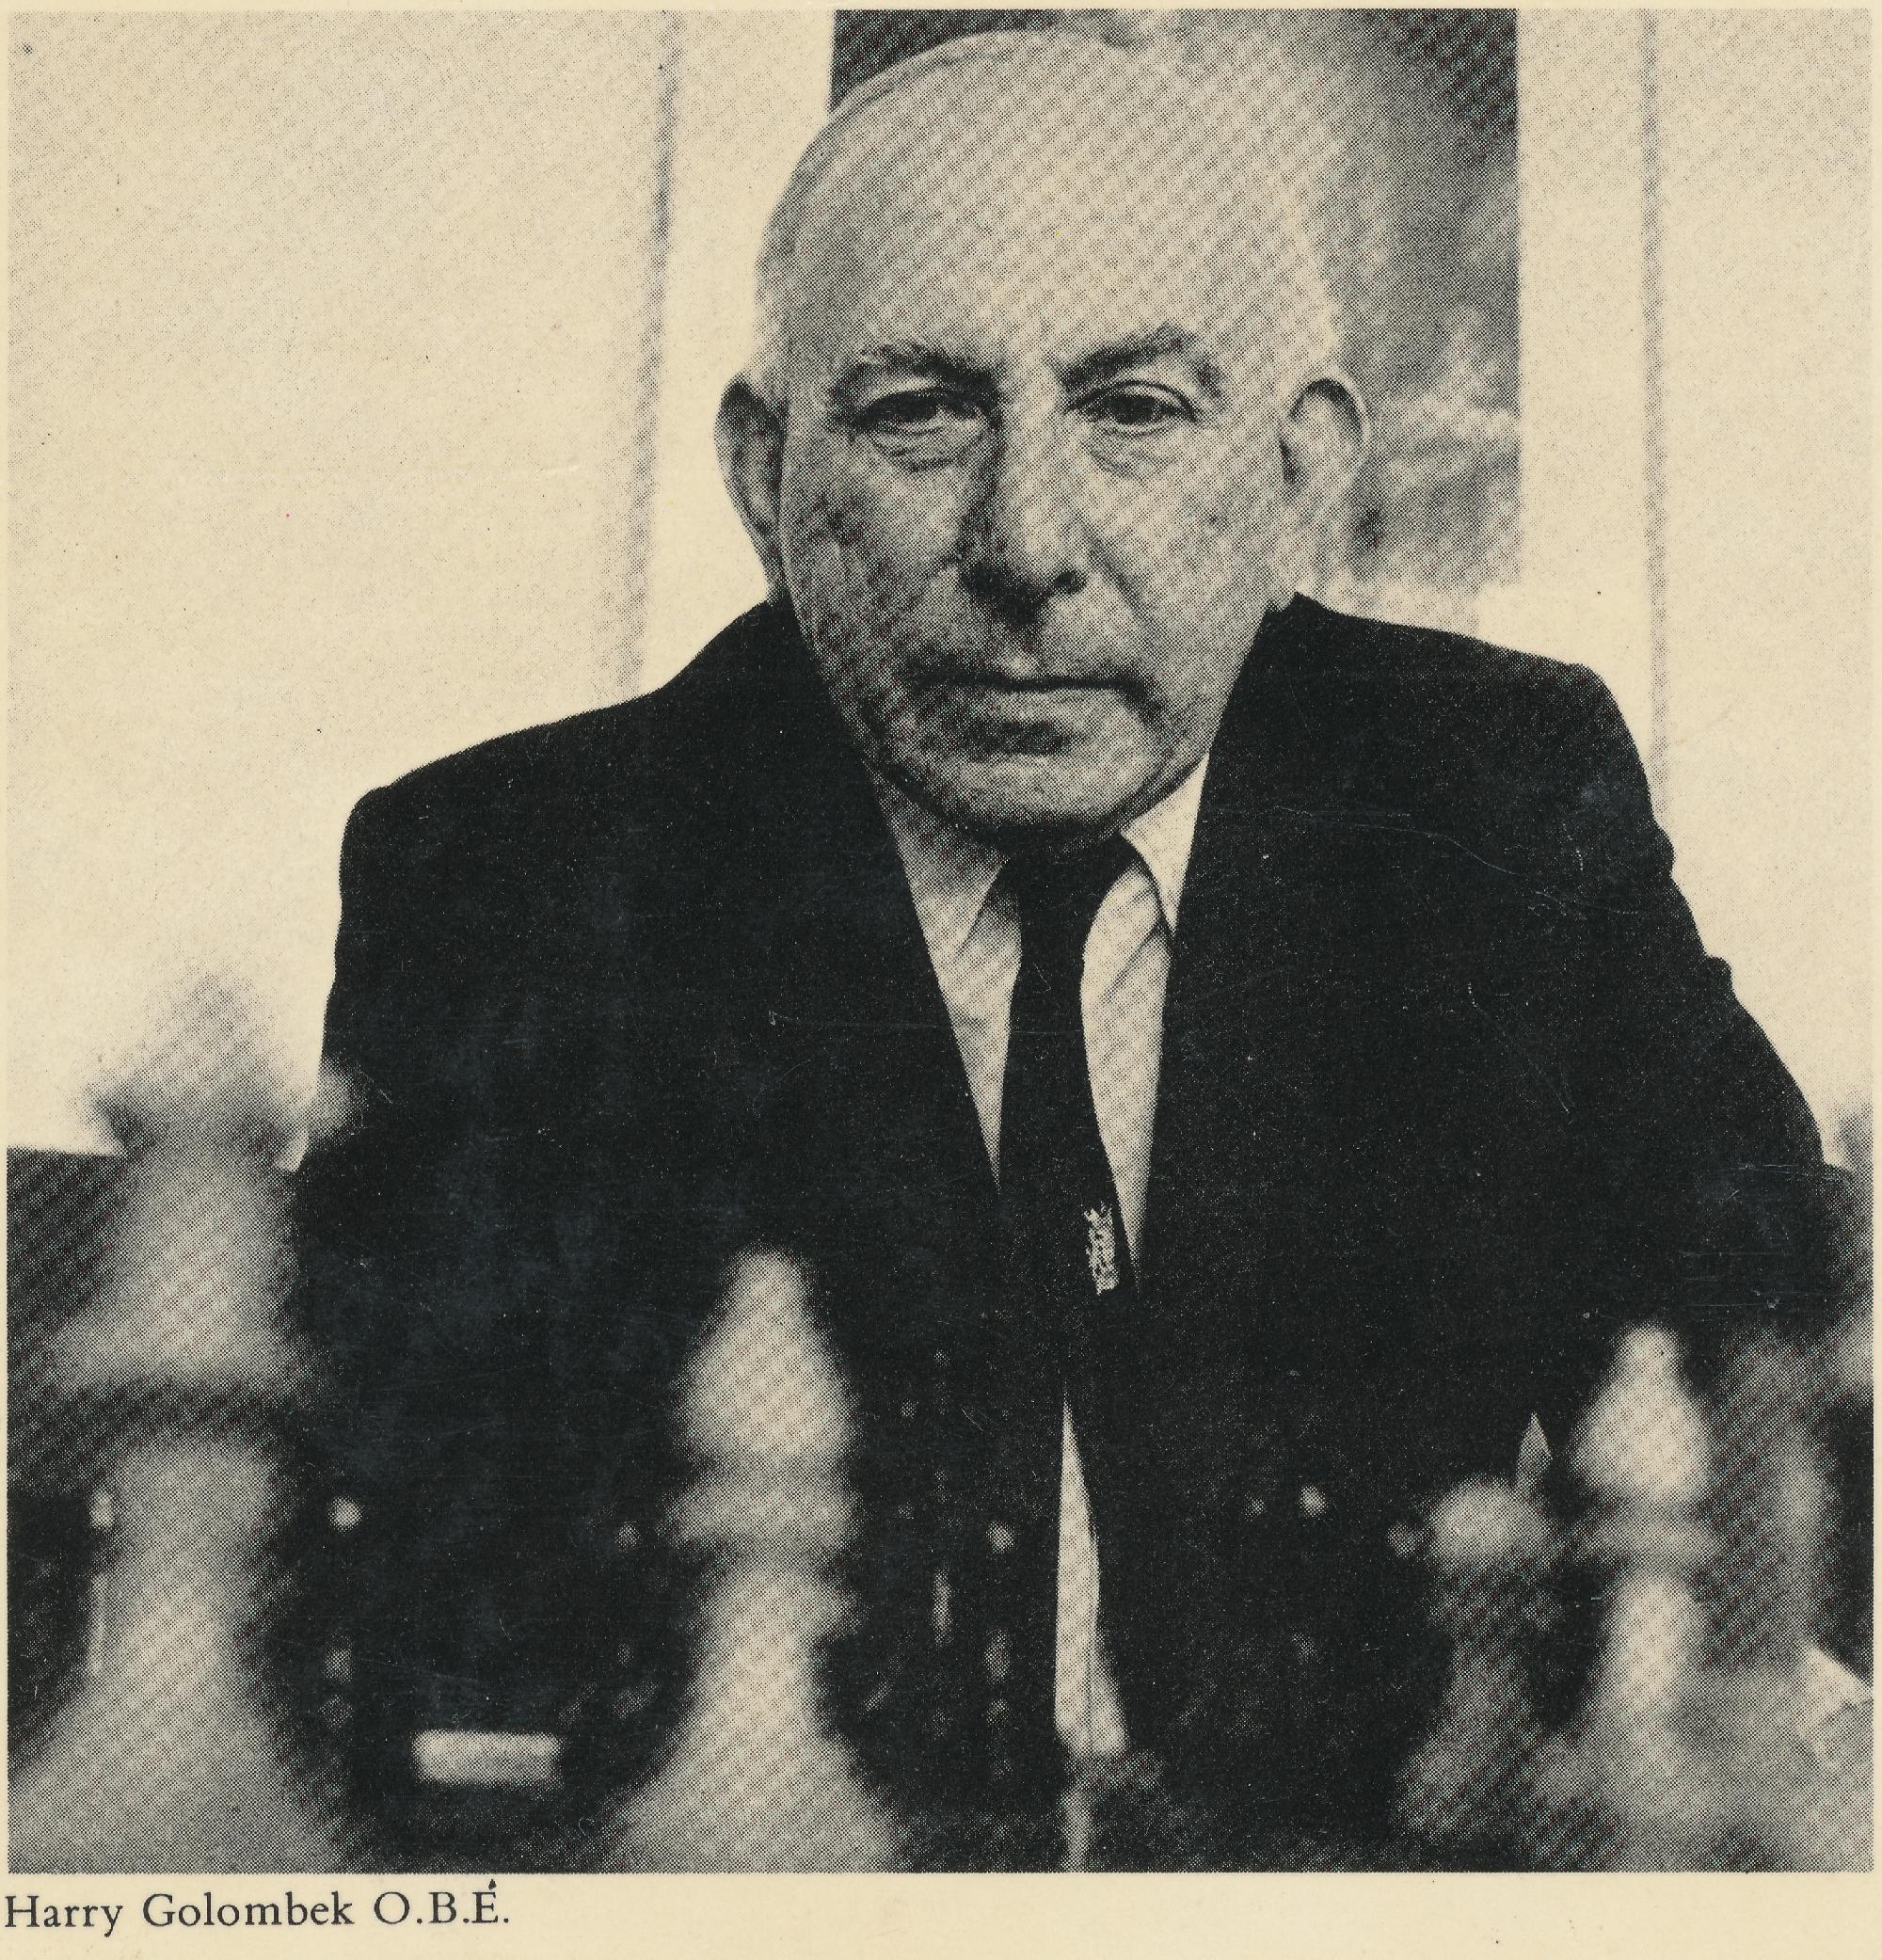 Harry Golombek, OBE (from the rear cover of A History of Chess